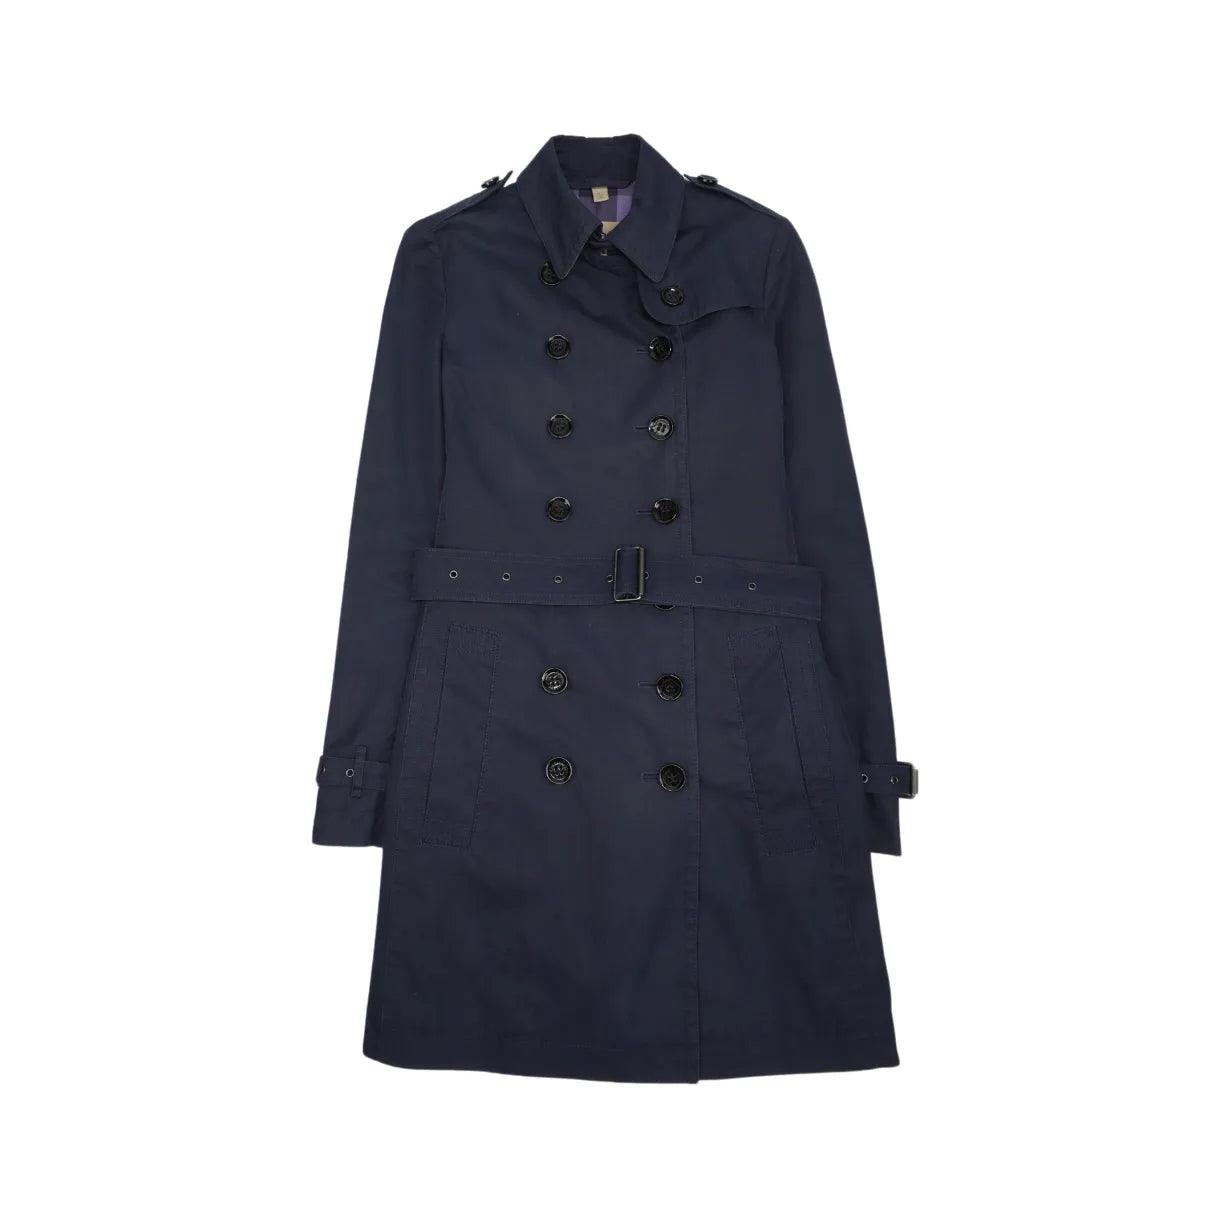 Burberry Brit Trench Jacket - Women's 4 - Fashionably Yours